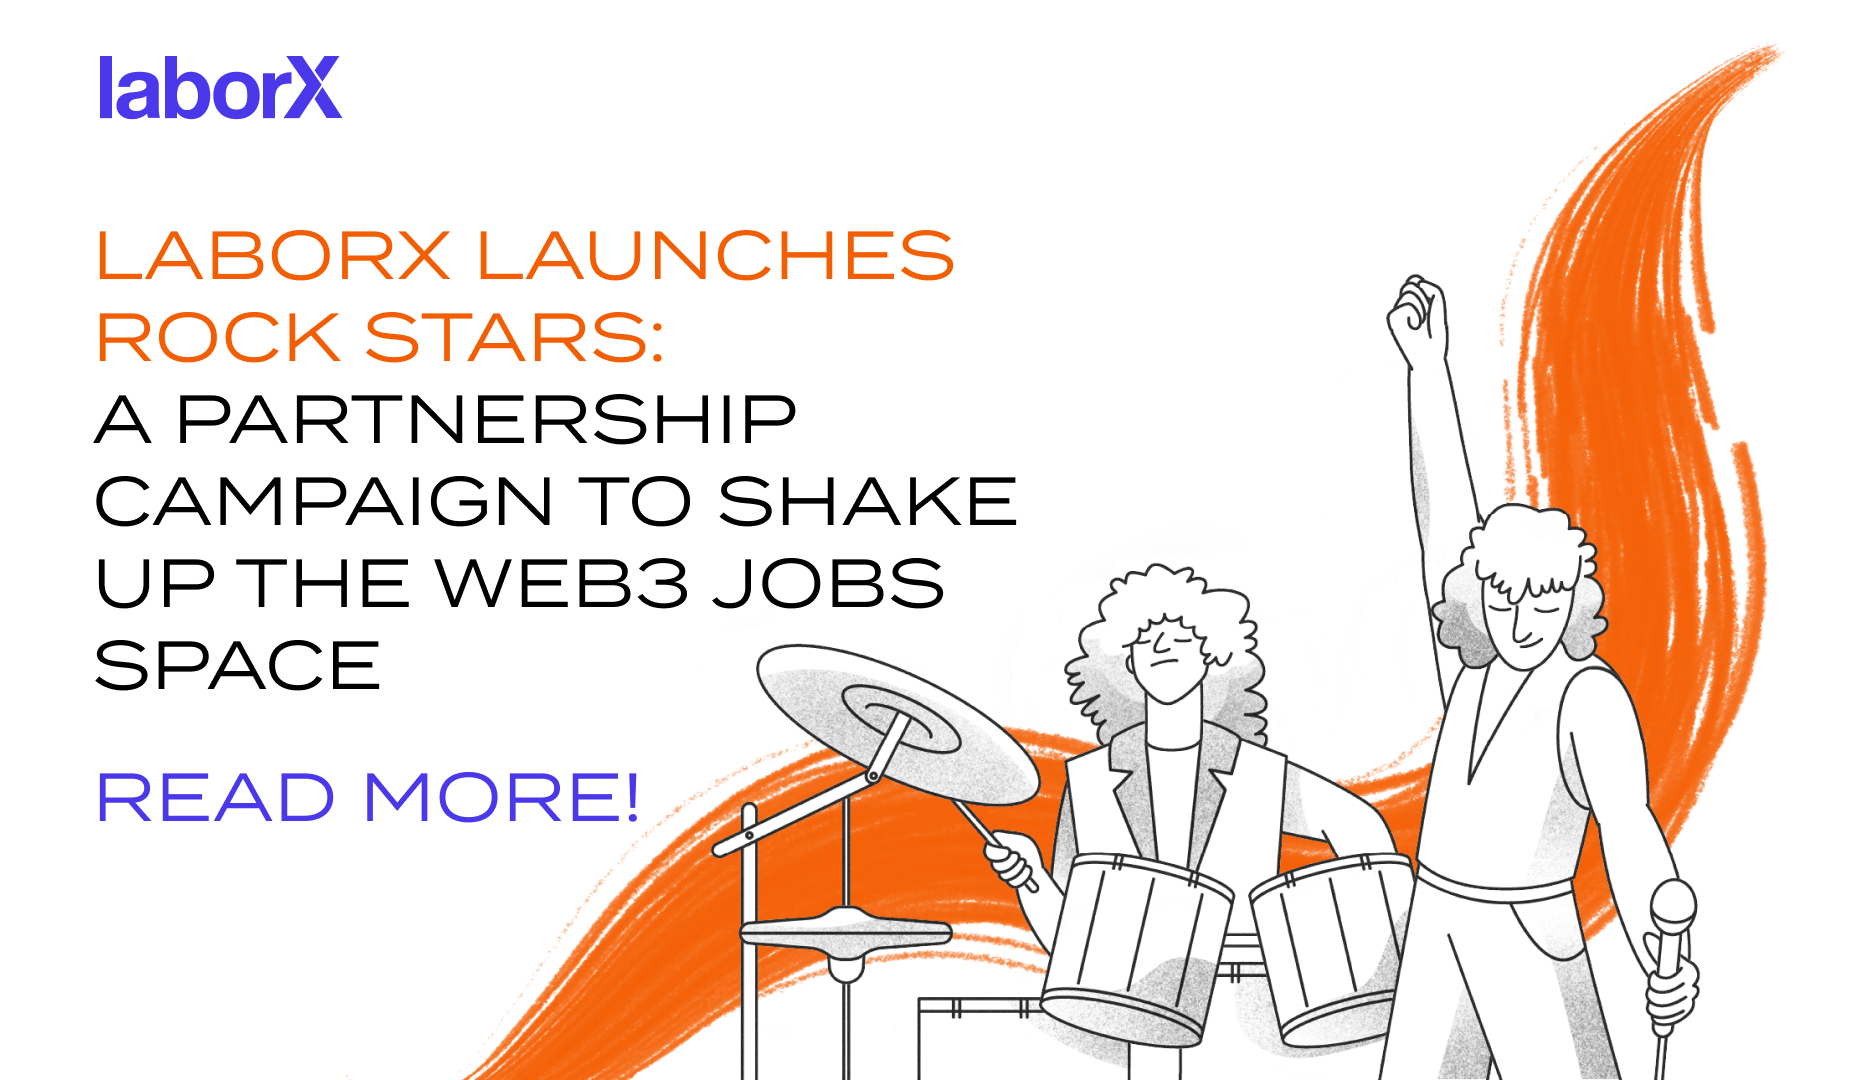 LaborX Launches Rock Stars: A Partnership Campaign to Shake Up the Web3 Jobs Space